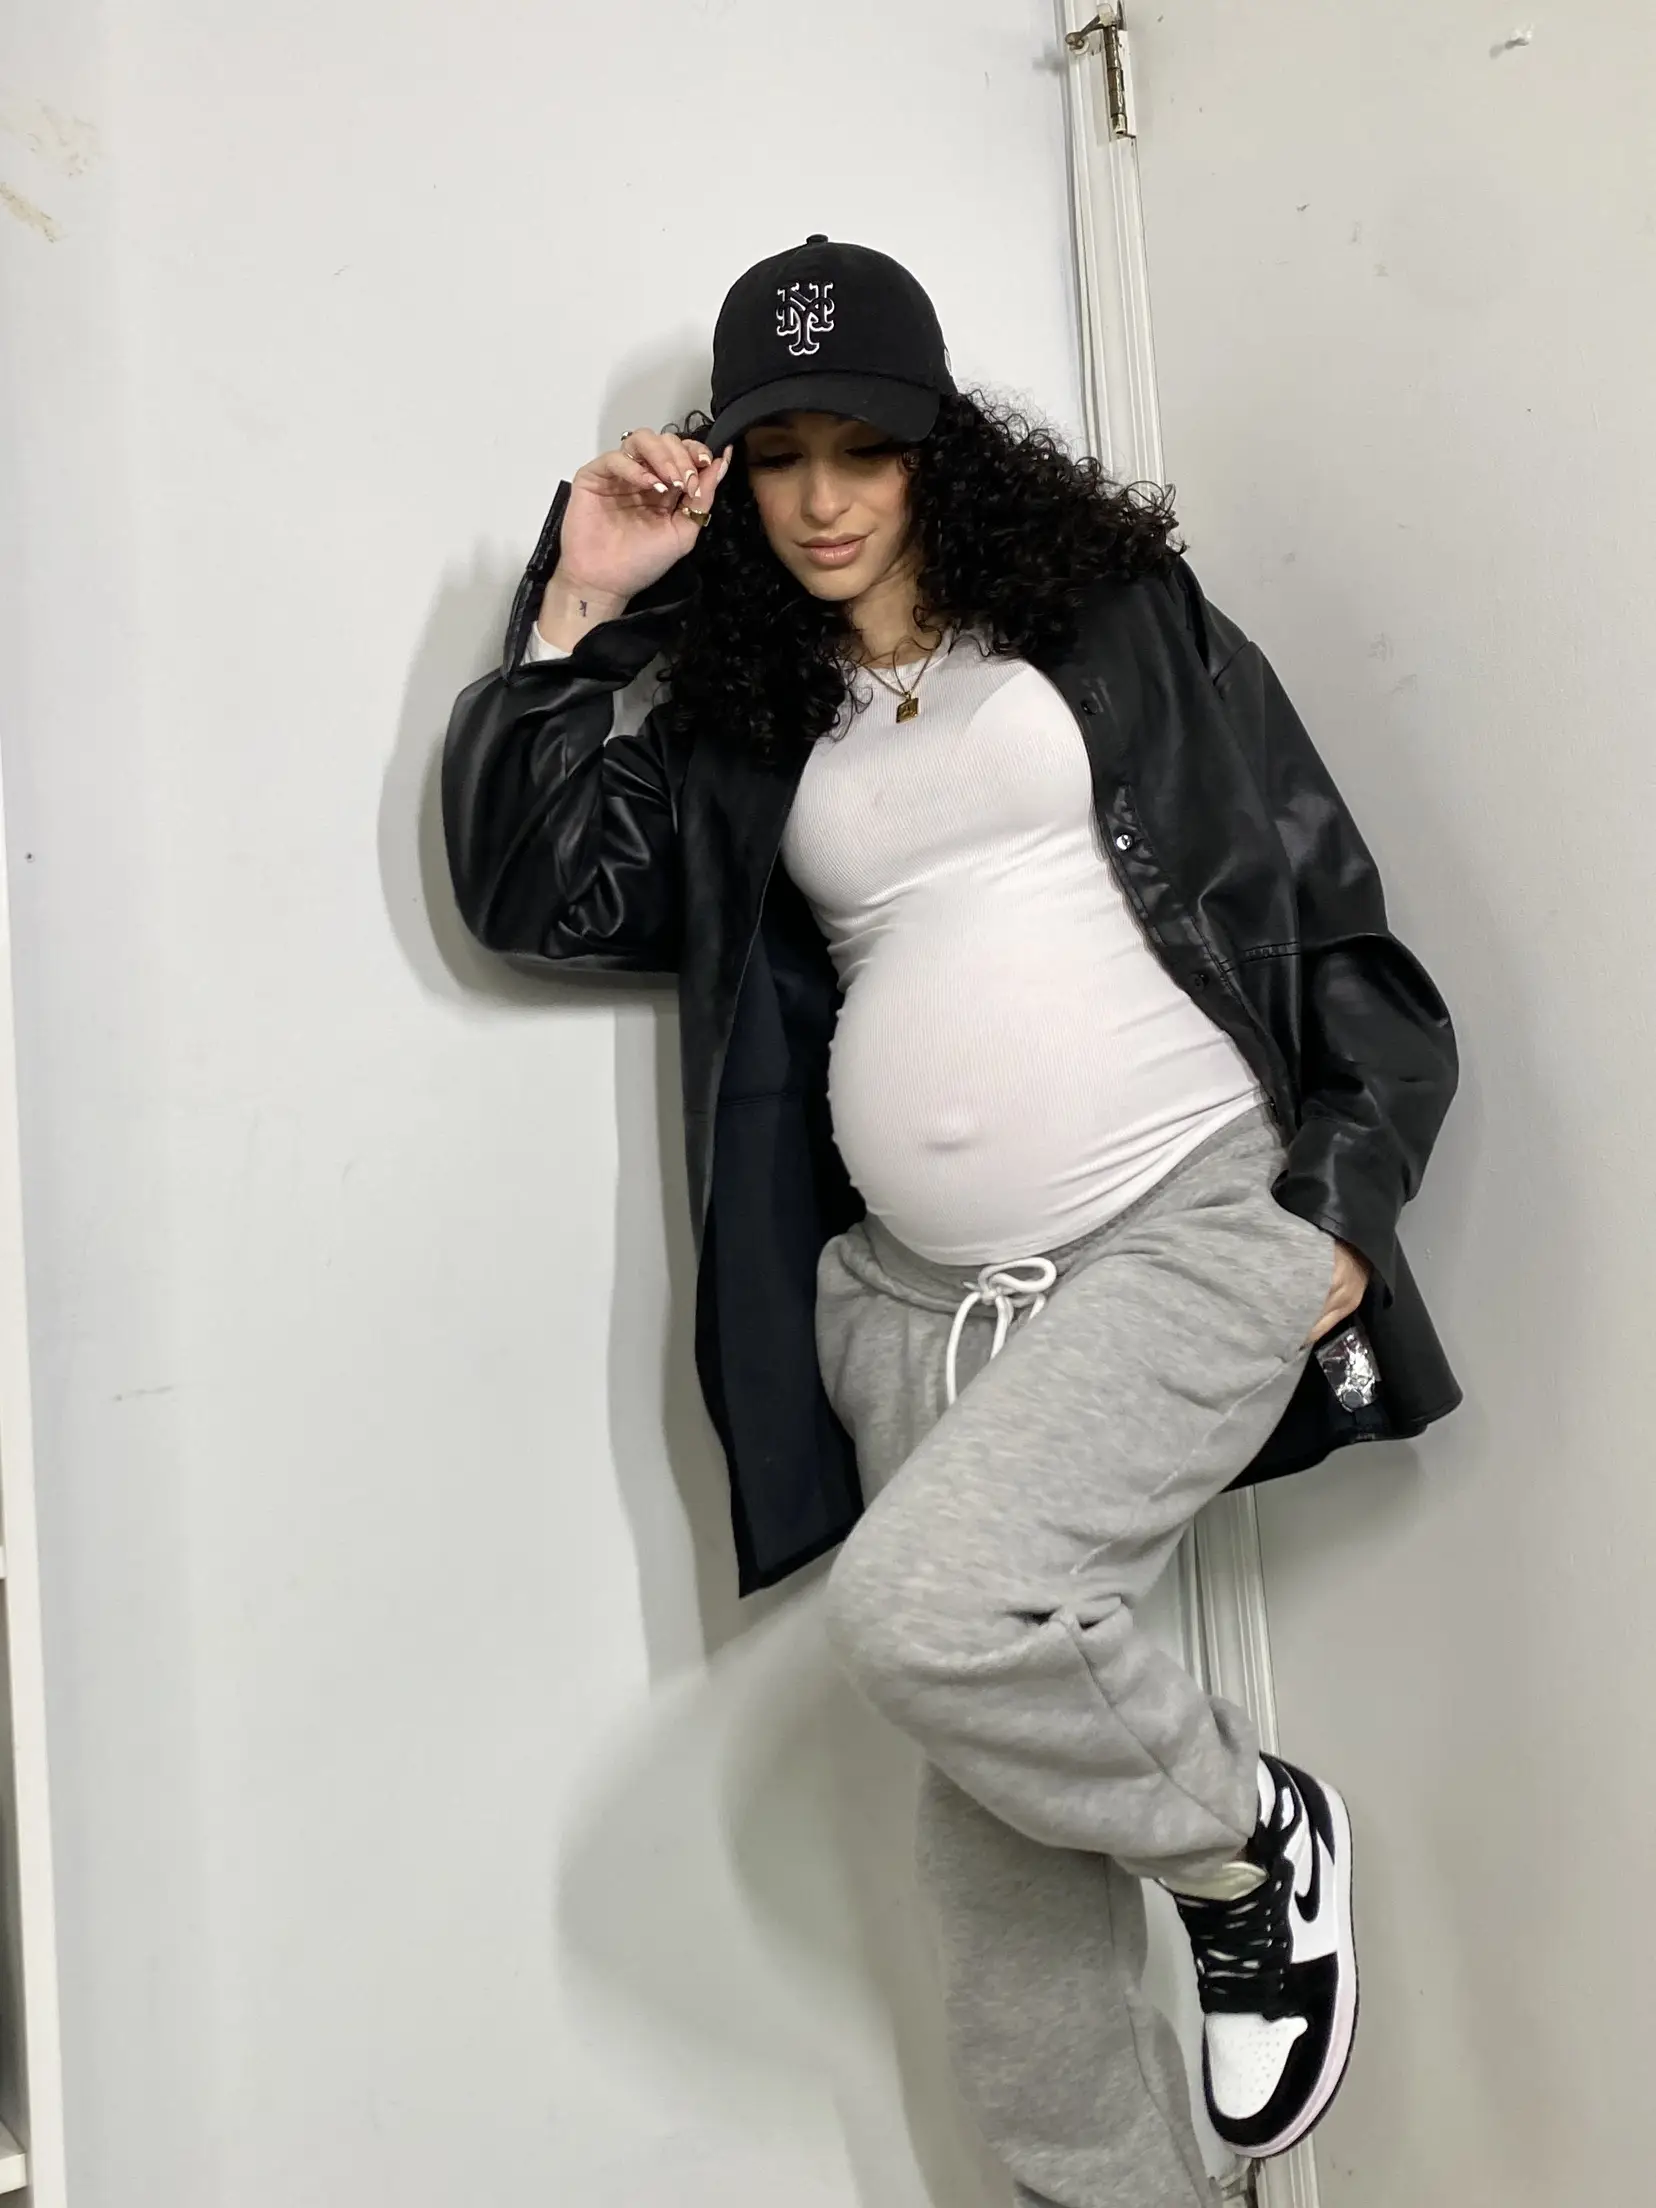 Skims try on 17 weeks pregnant, Video published by Krystiana